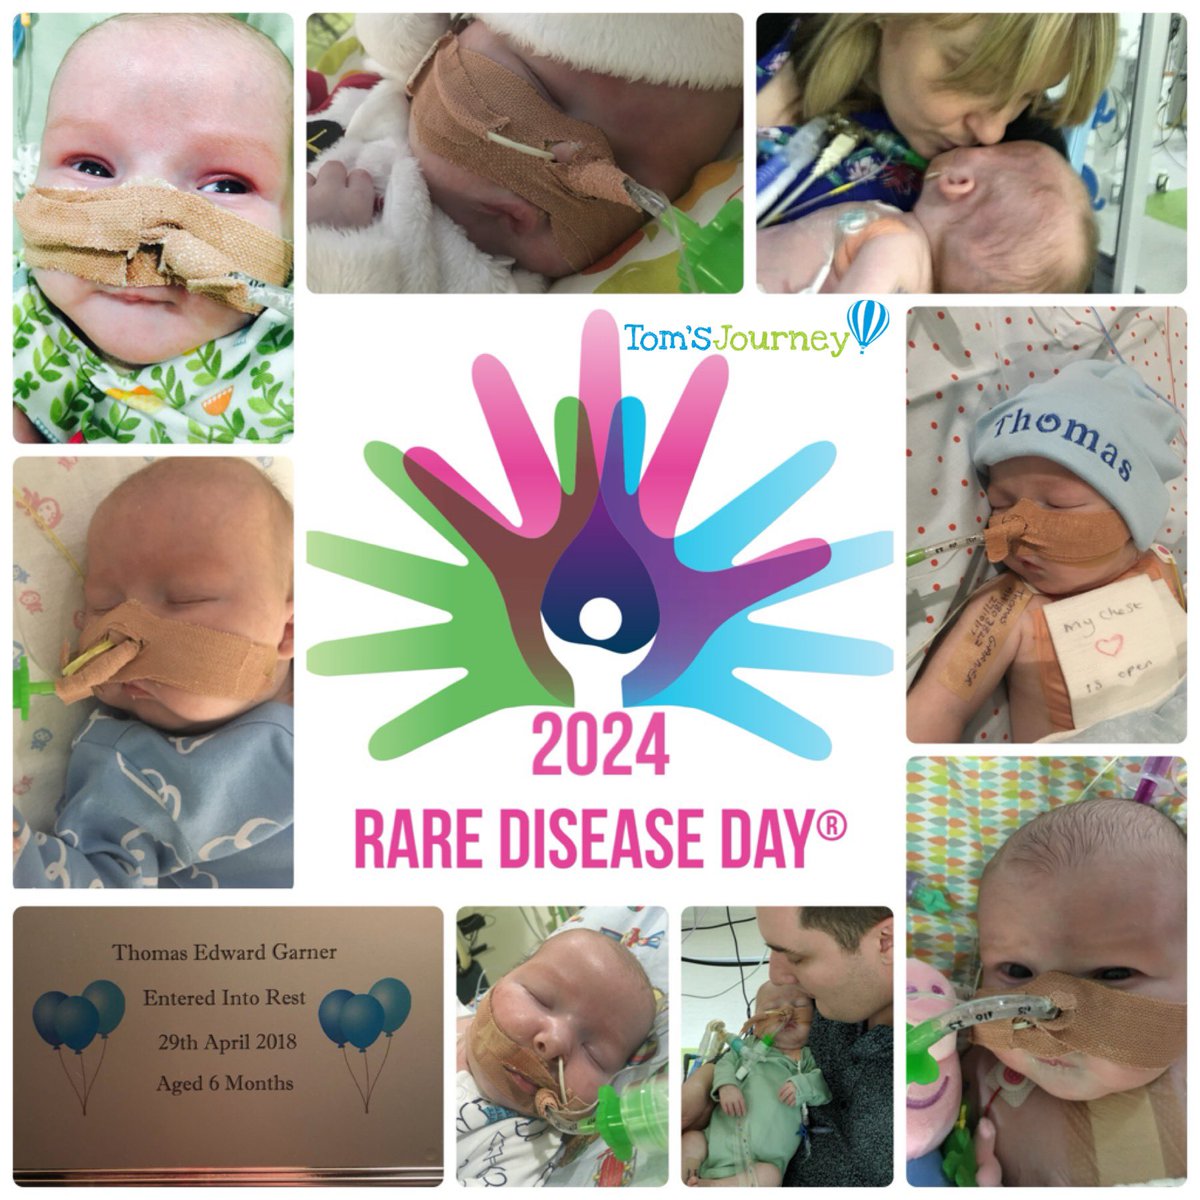 On Rare Diseases Day 2024, I’d like to raise awareness of 22q11.2 Deletion Syndrome. If you do nothing else for  #RareDiseaseDay2024 today, please give this a share…let’s #RaiseAwareness on todays #LeapYear, and get #DiGeorgeSyndrome out there in Thomas’ memory. 

Otherwise